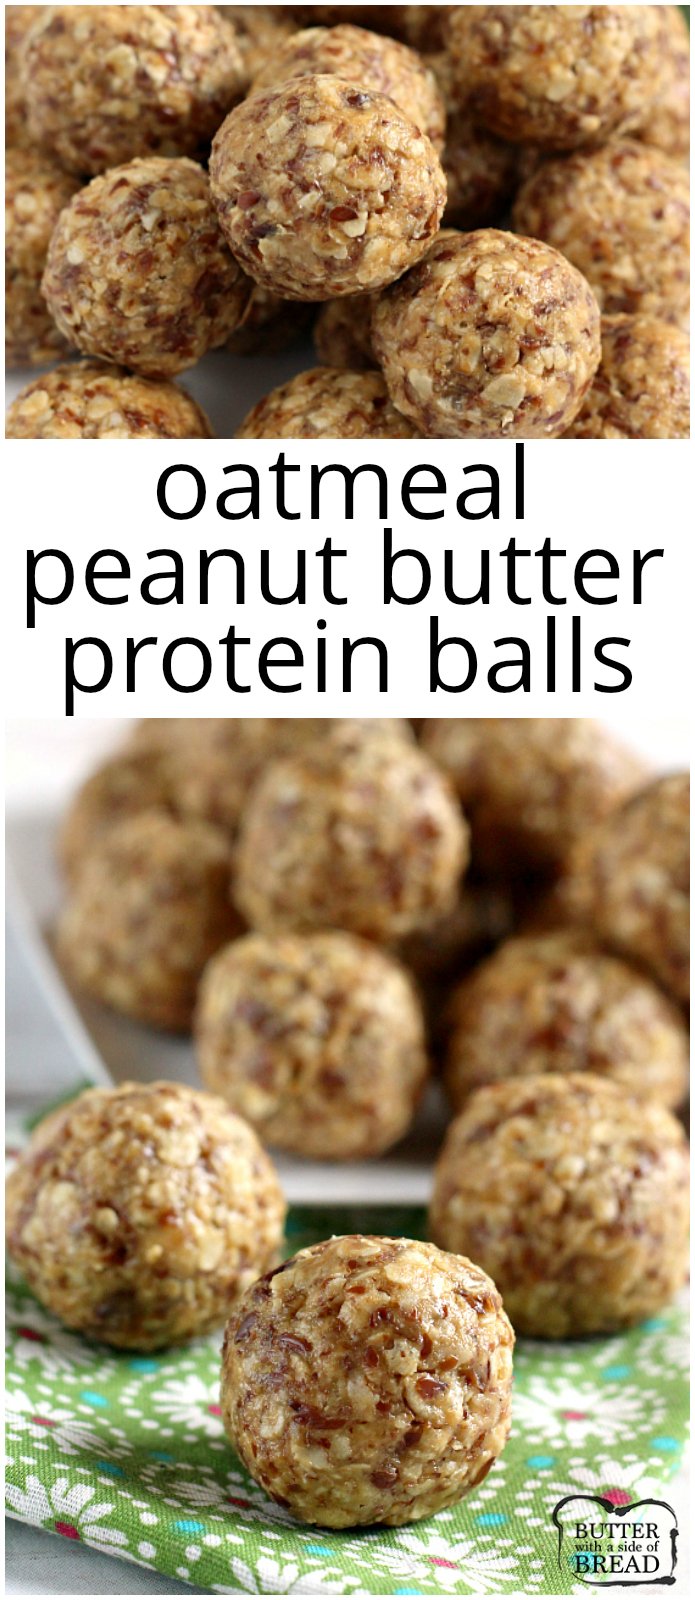 Oatmeal Peanut Butter Protein Balls are made with oats, peanut butter, honey, flaxseed, Rice Krispies, coconut oil and vanilla. These are healthy, filling and the tastiest protein ball recipe that I've ever tried!